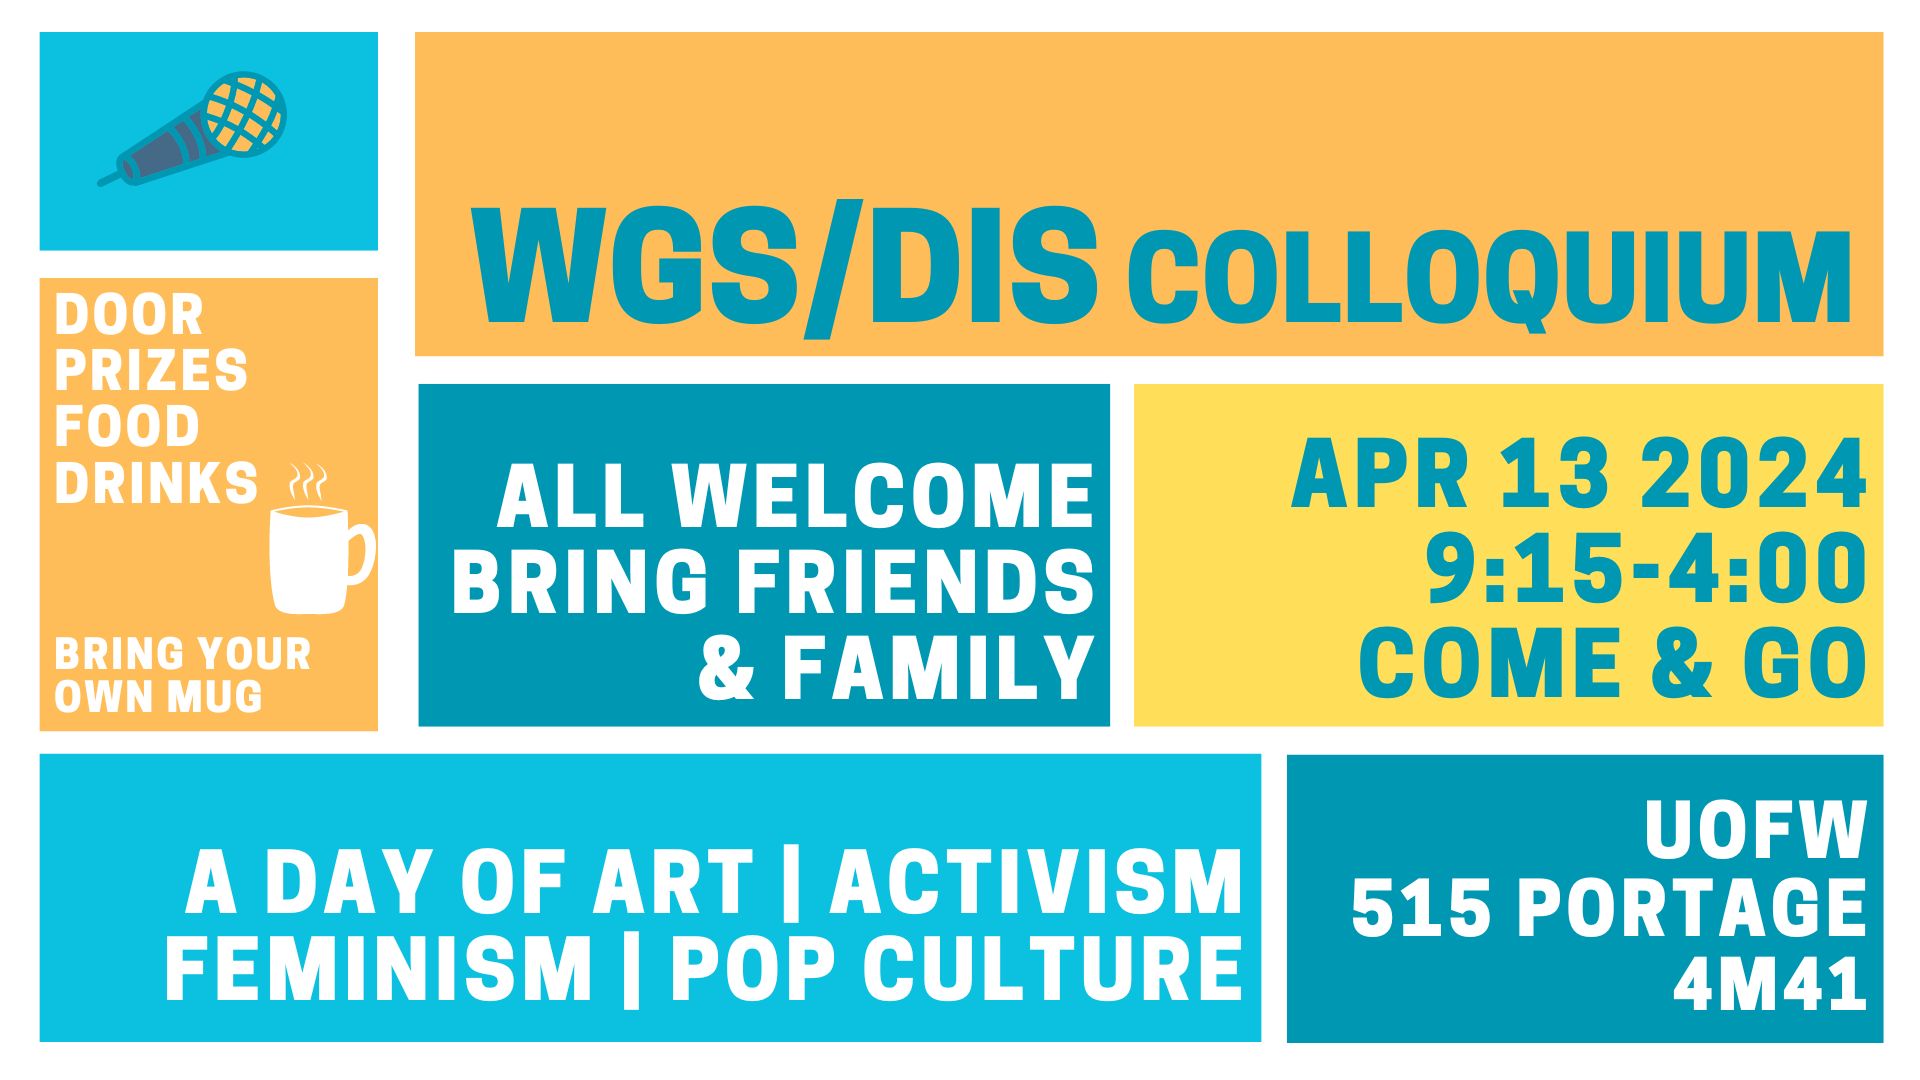 Colourblock design poster promoting WGS/DIS Colloquium: Door prizes, food, drinks, bring your own mug; all welcome, bring friends & family; Apr 13 2024, 9:15-4:00, come & go; A day of art | activism | feminism | pop culture; UofW 515 Portage 4M41